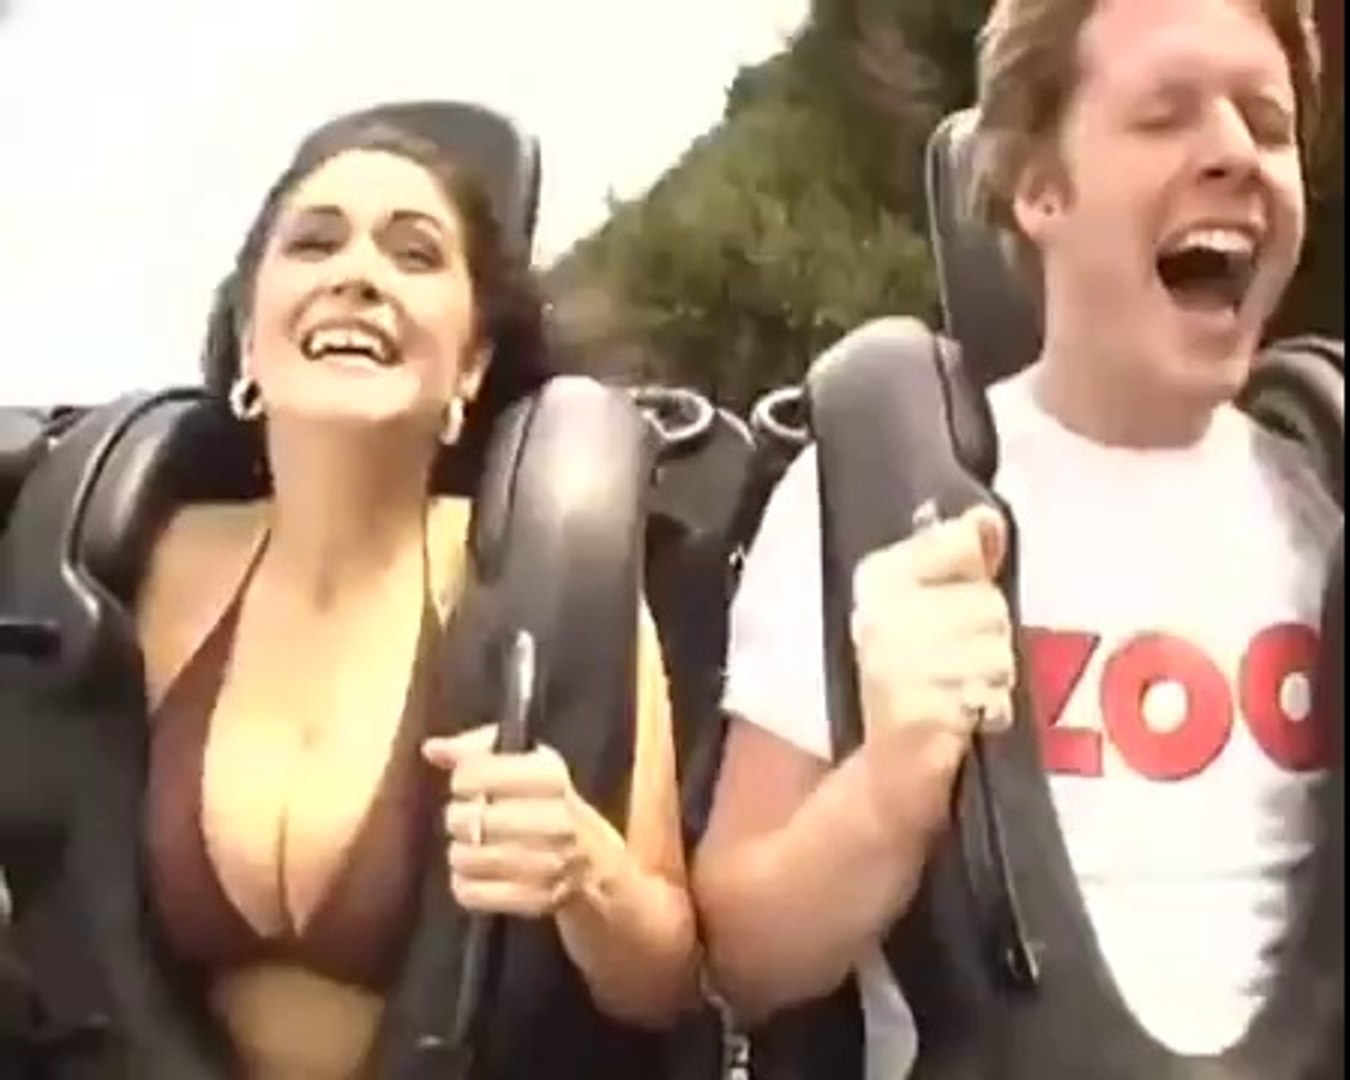 Rollercoaster tits